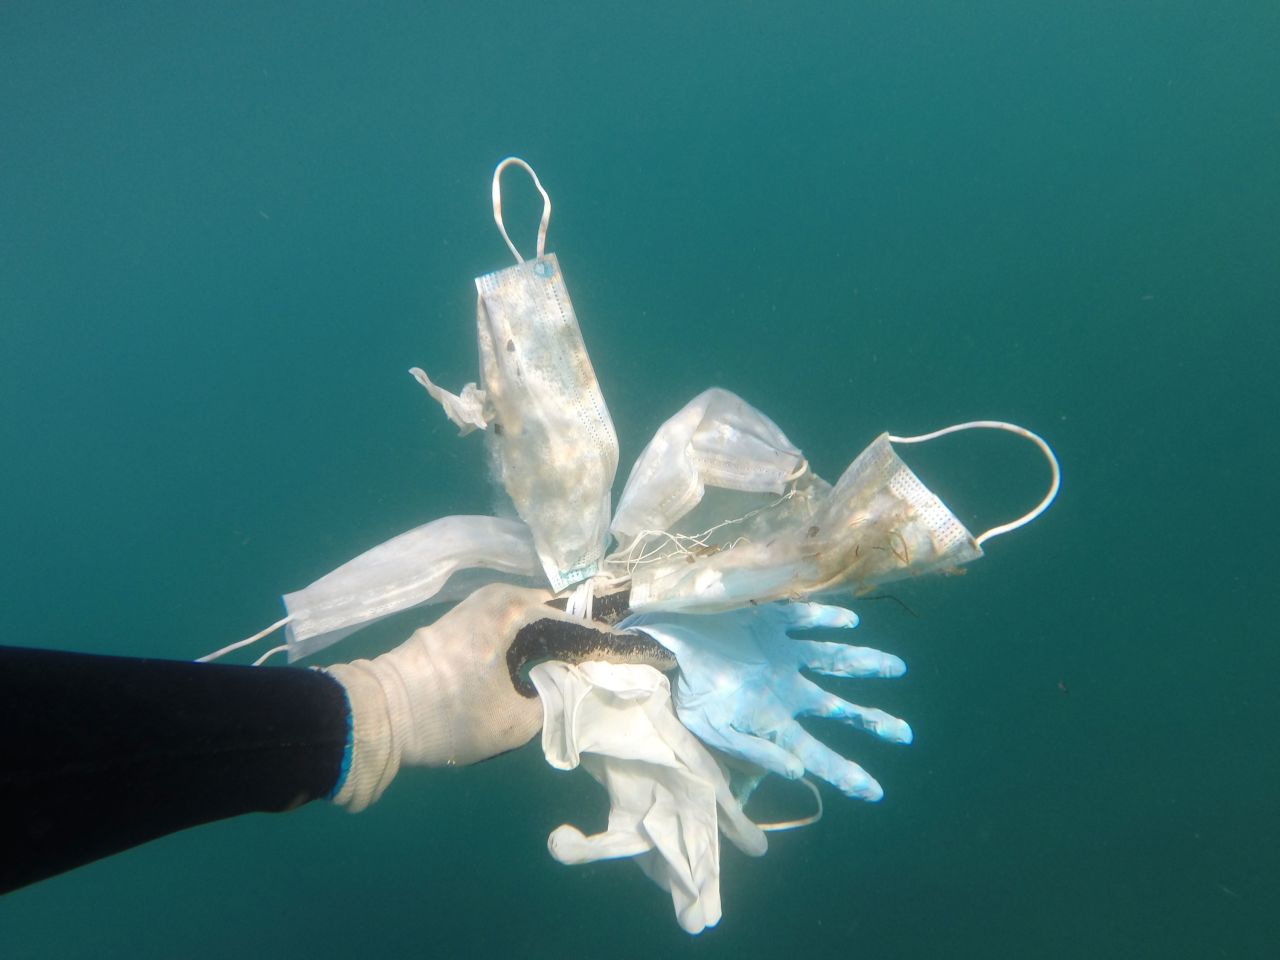 Used masks and gloves are collected from the ocean. 